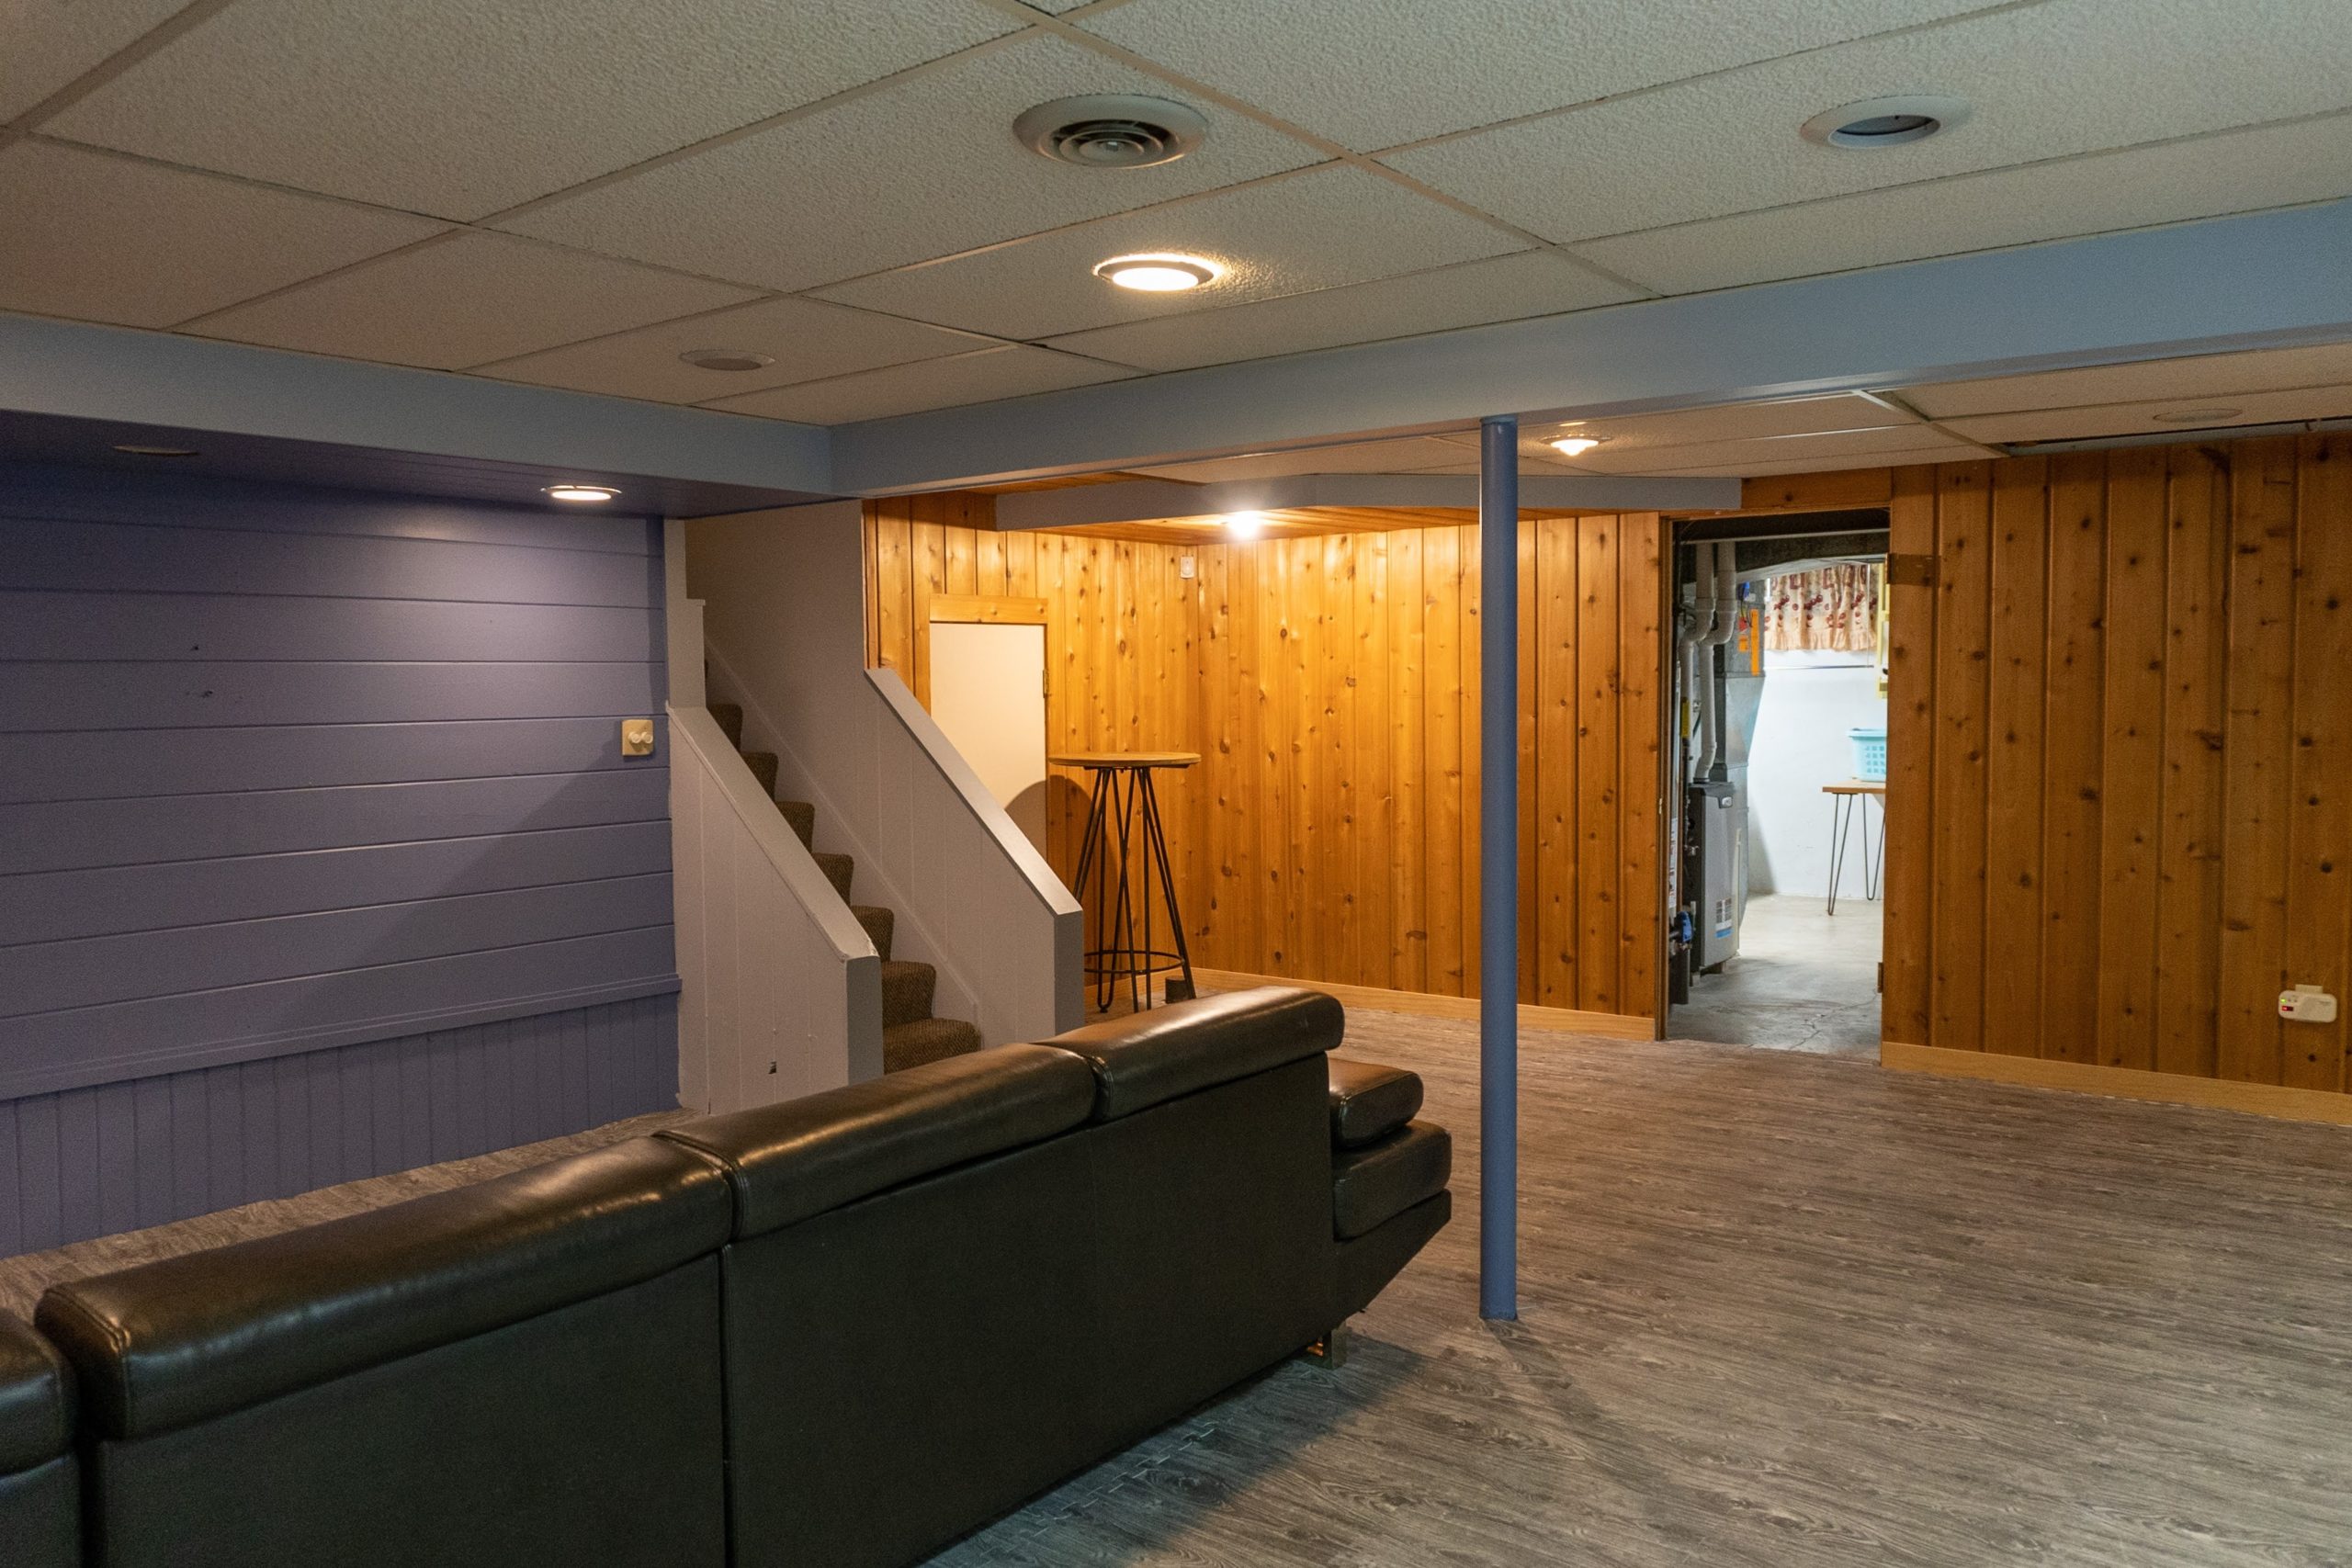 Building A Basement – How To Choose The Right Basement Building Company?